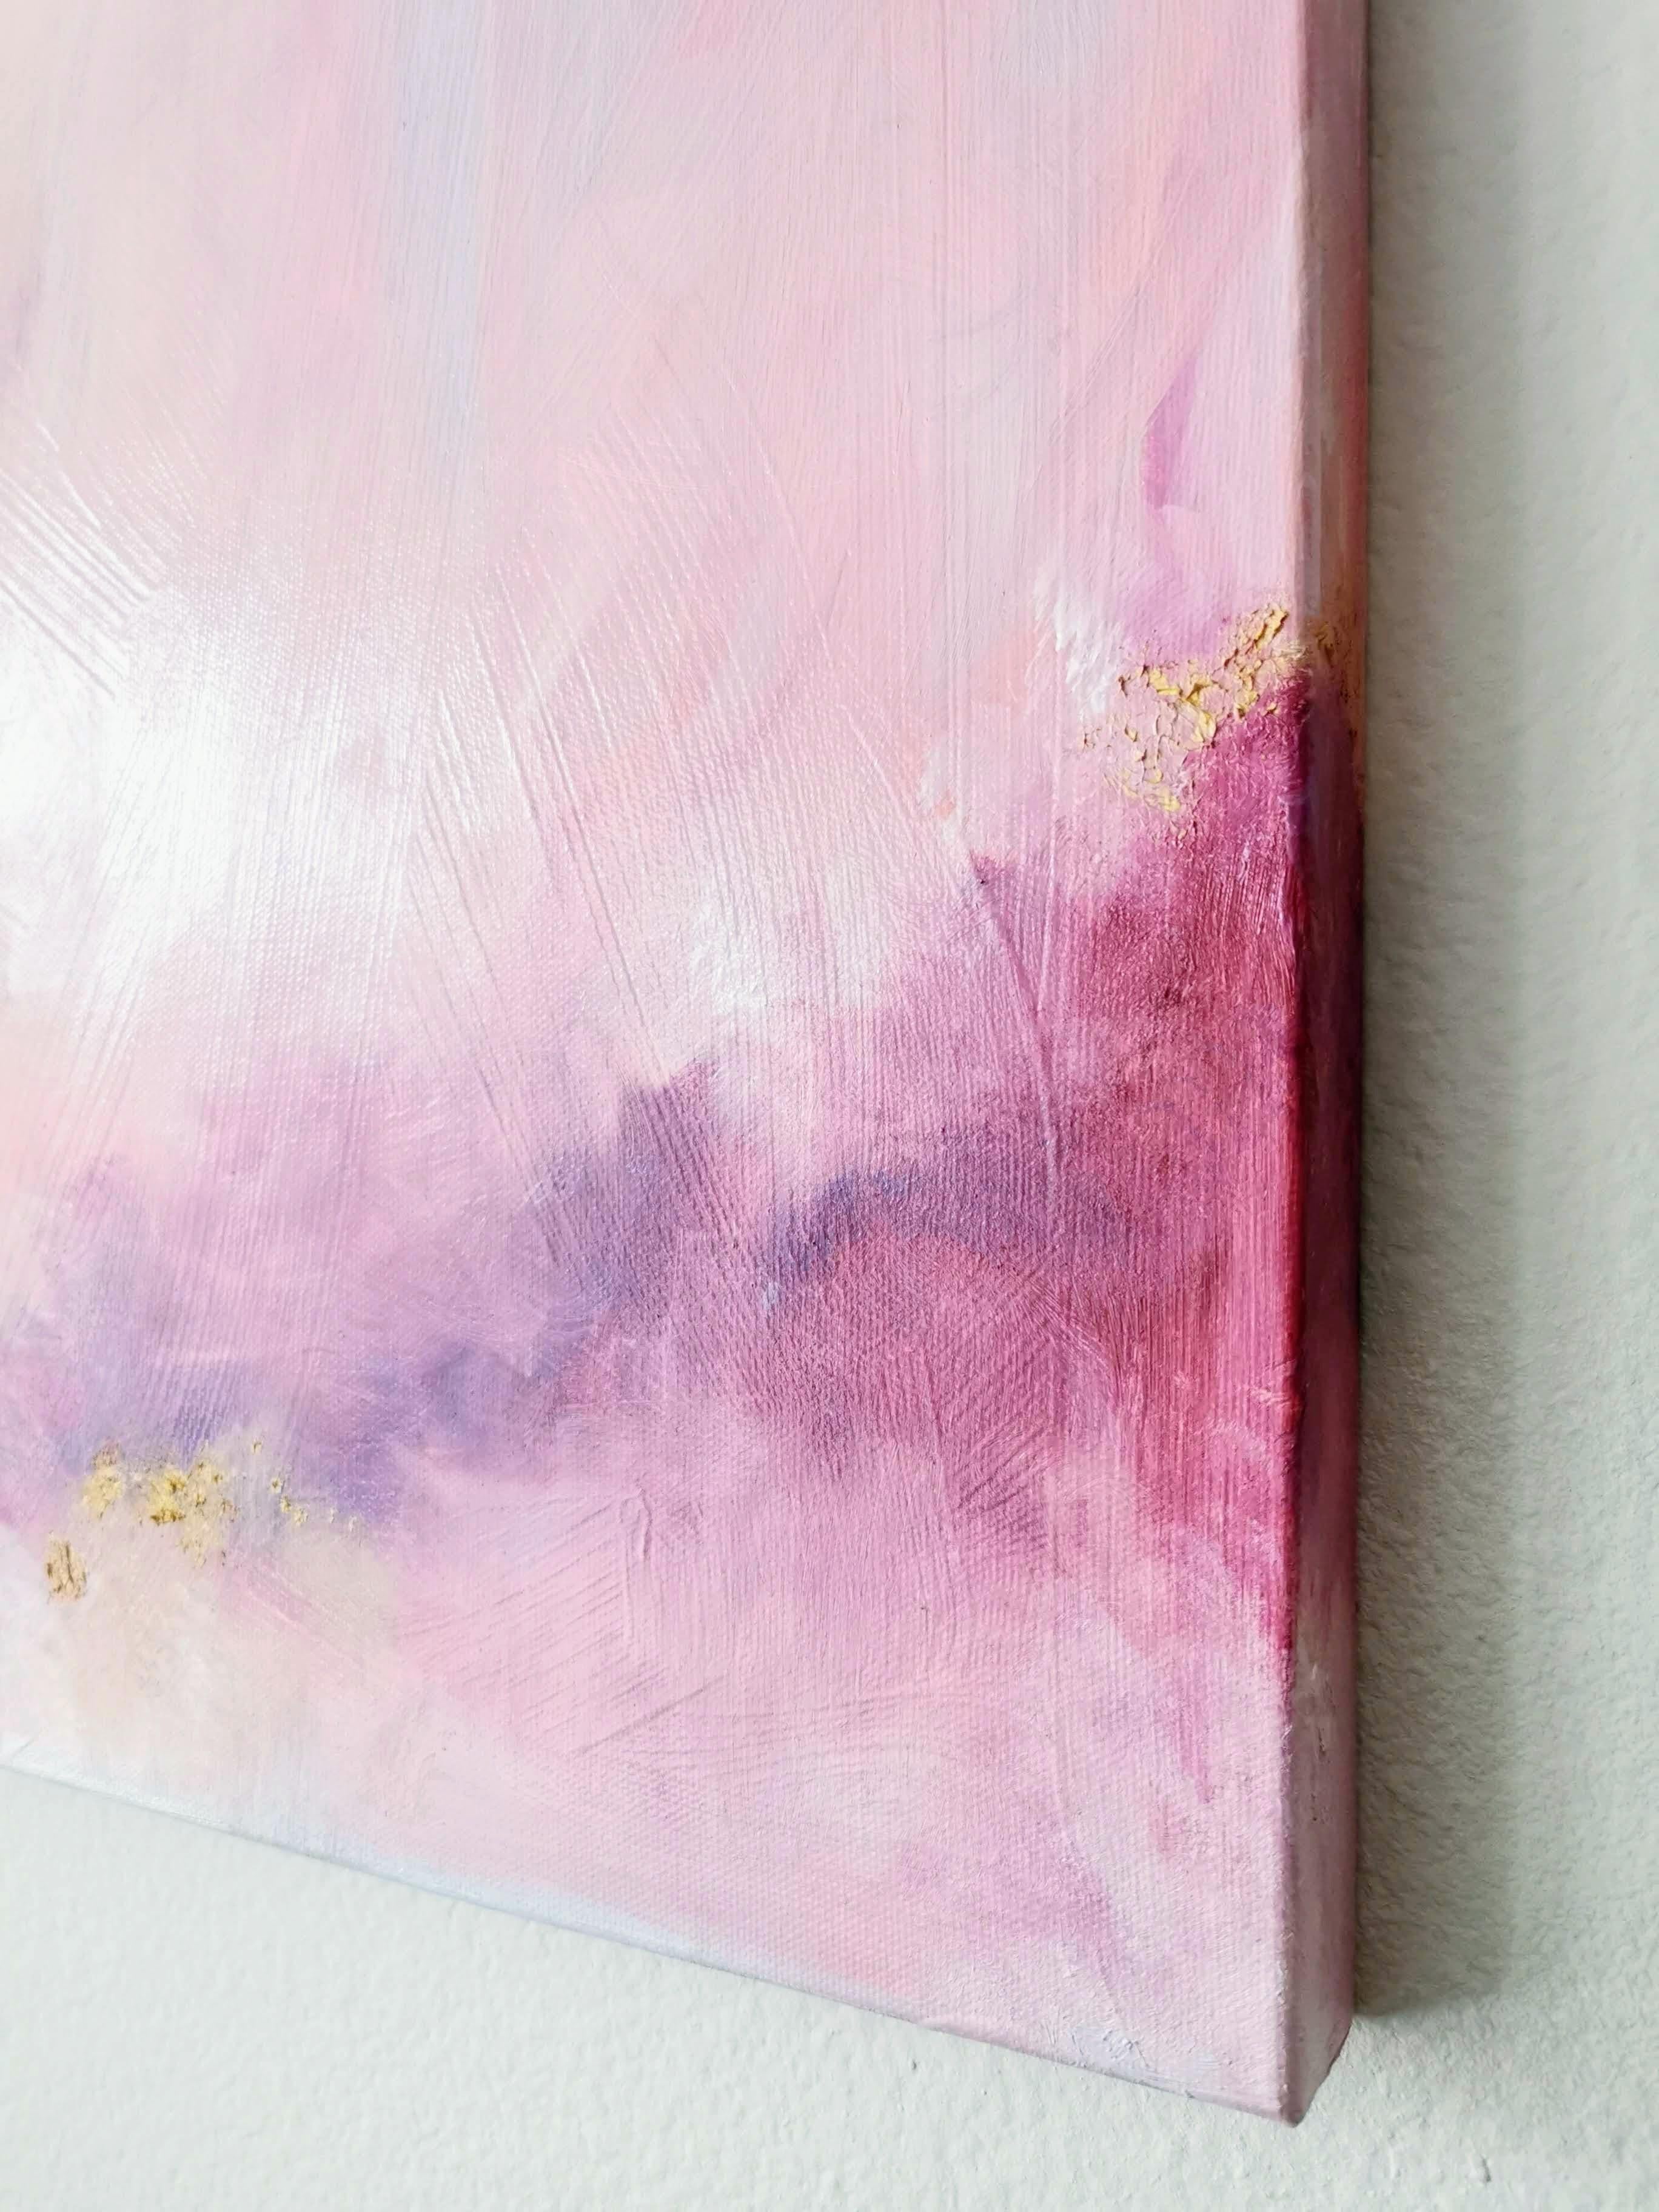 This is why I love you - Pink and gold abstract painting - Purple Abstract Painting by Jennifer L. Baker